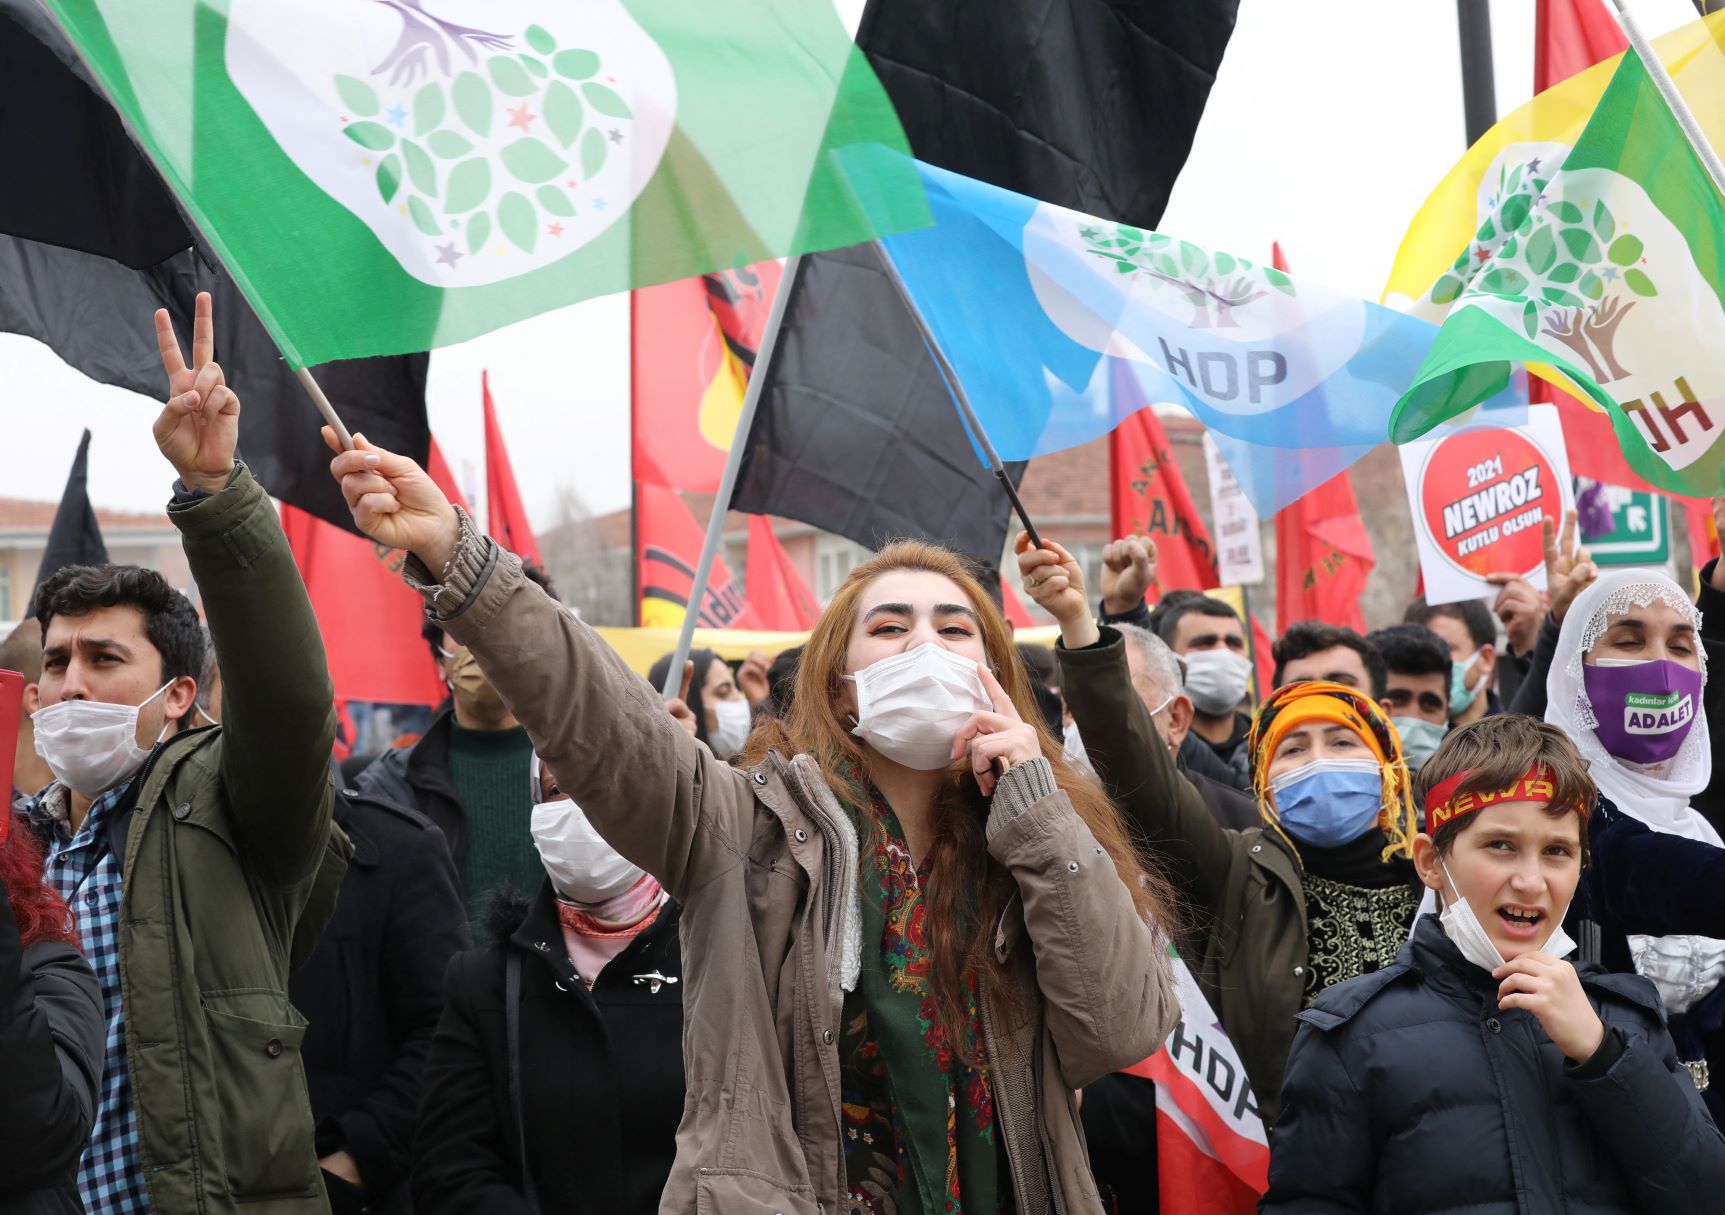 Supporters of Pro-Kurdish Peoples' Democratic Party (HDP) shout slogans during a rally as part of Nowruz (Newroz), or Kurdish New Year, celebrations in Ankara, on March 21, 2021 (AFP)